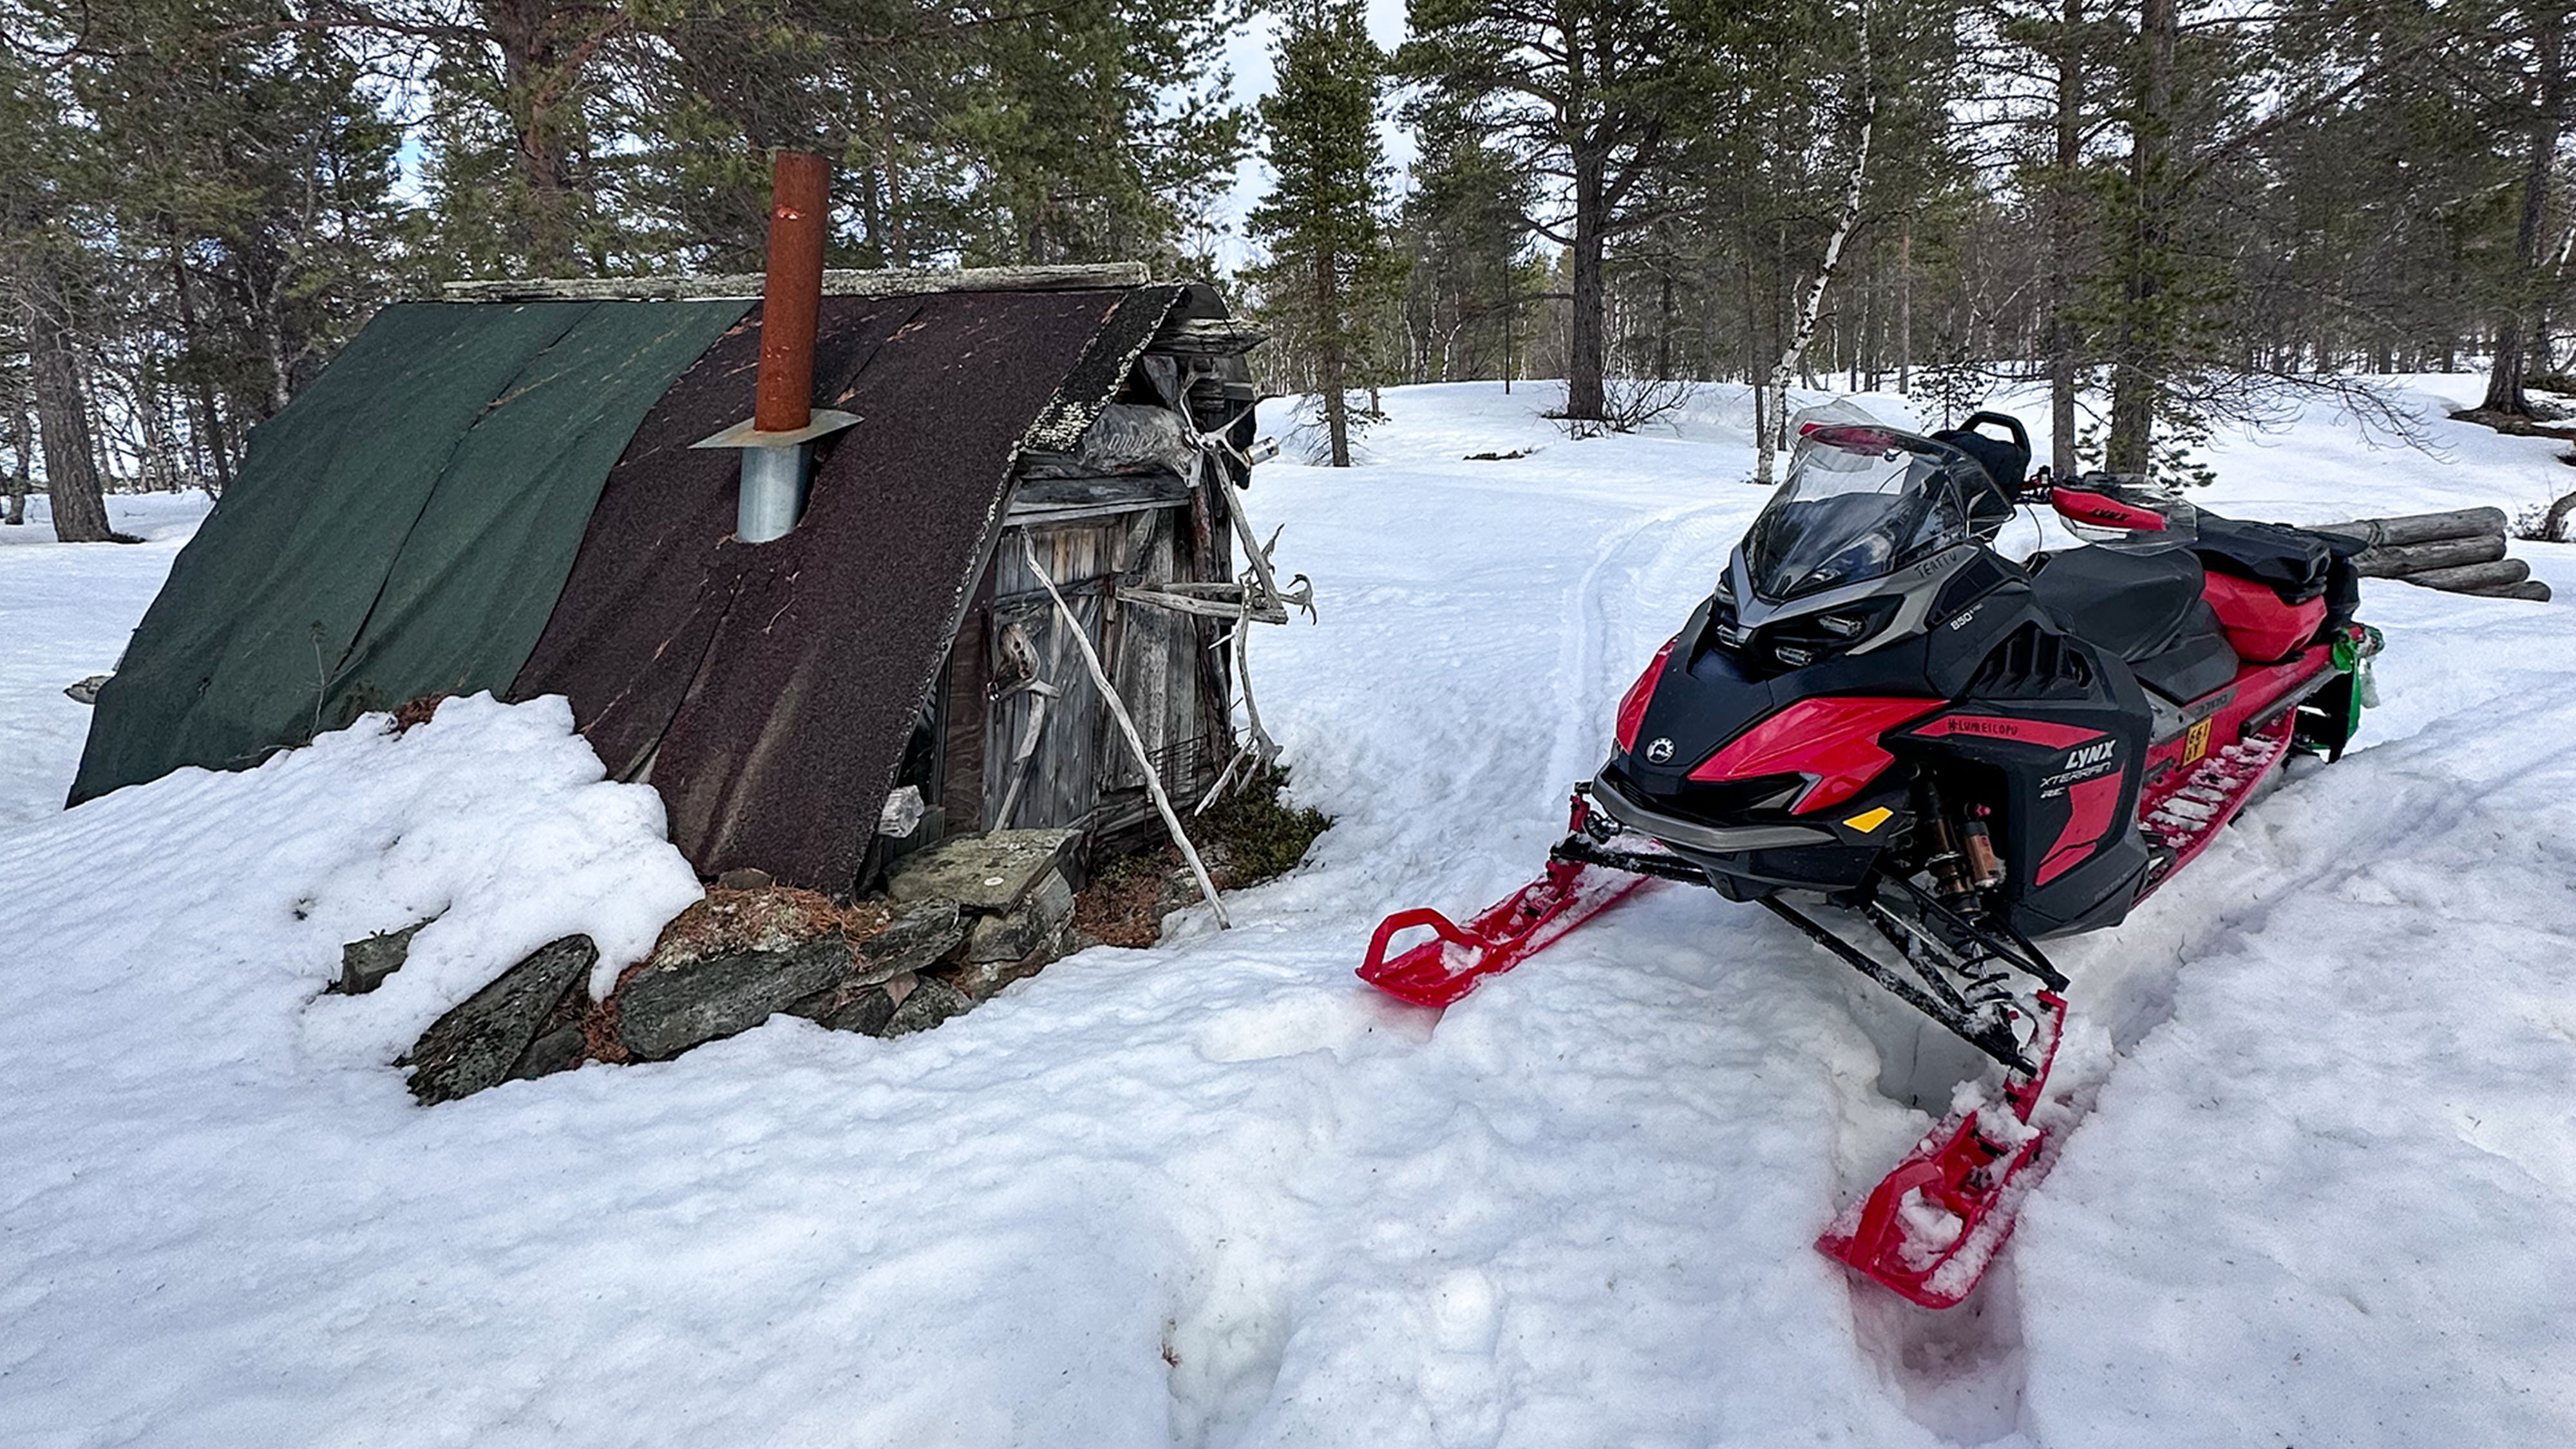 Lynx Xterrain RE 850 E-TEC crossover snowmobile parked next to an old wilderness hut